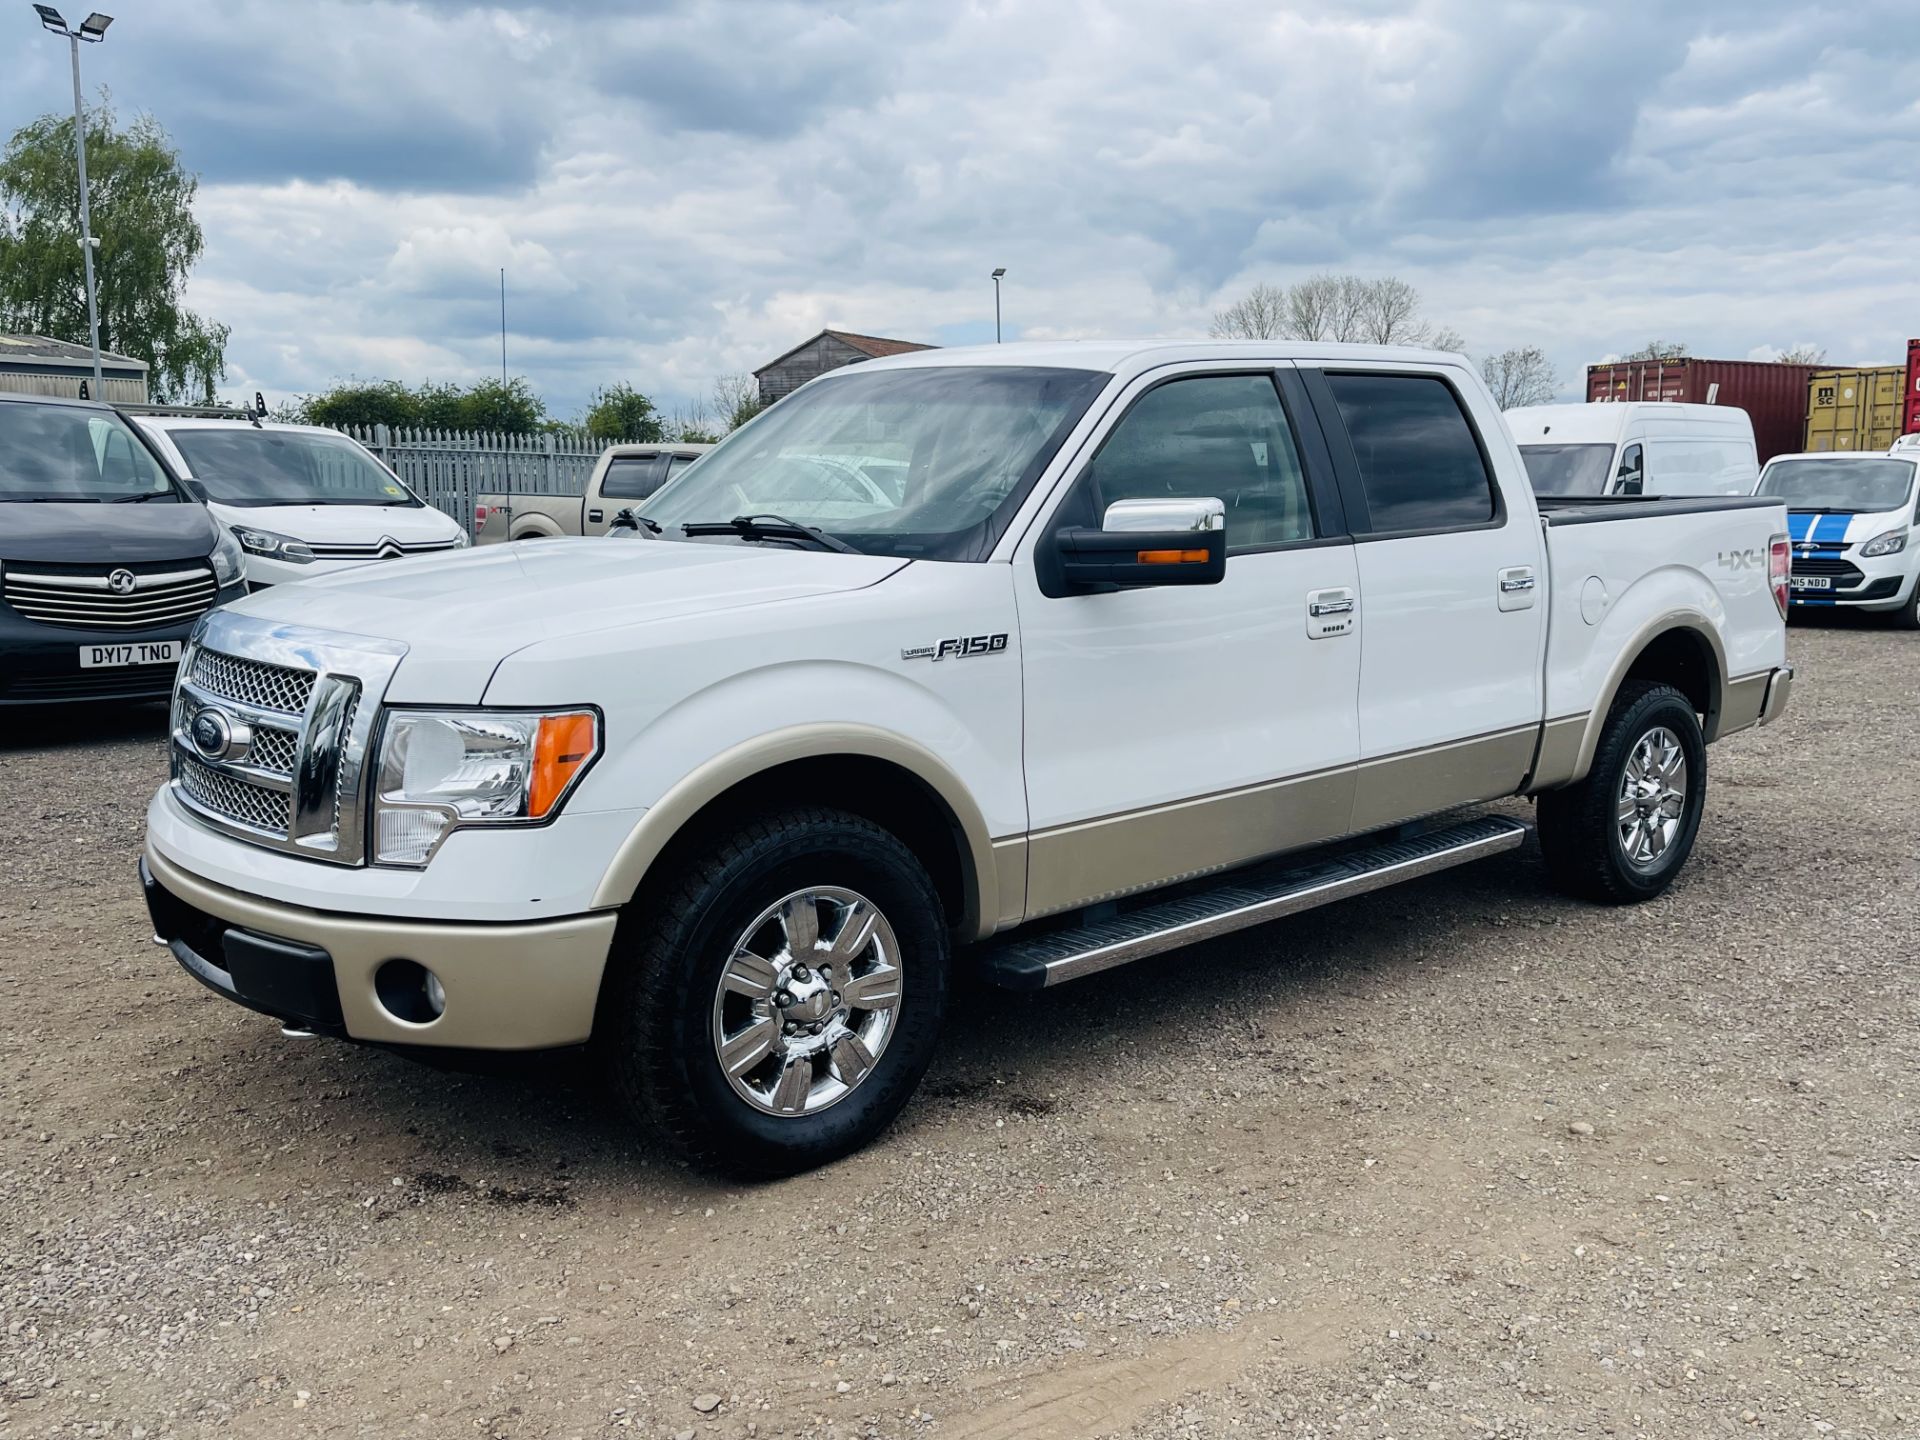 ** ON SALE ** Ford F-150 5.4L V8 Lariat Supercrew 4WD ' 2010 Year' A/C - Full Spec - ULEZ Compliant - Image 5 of 29